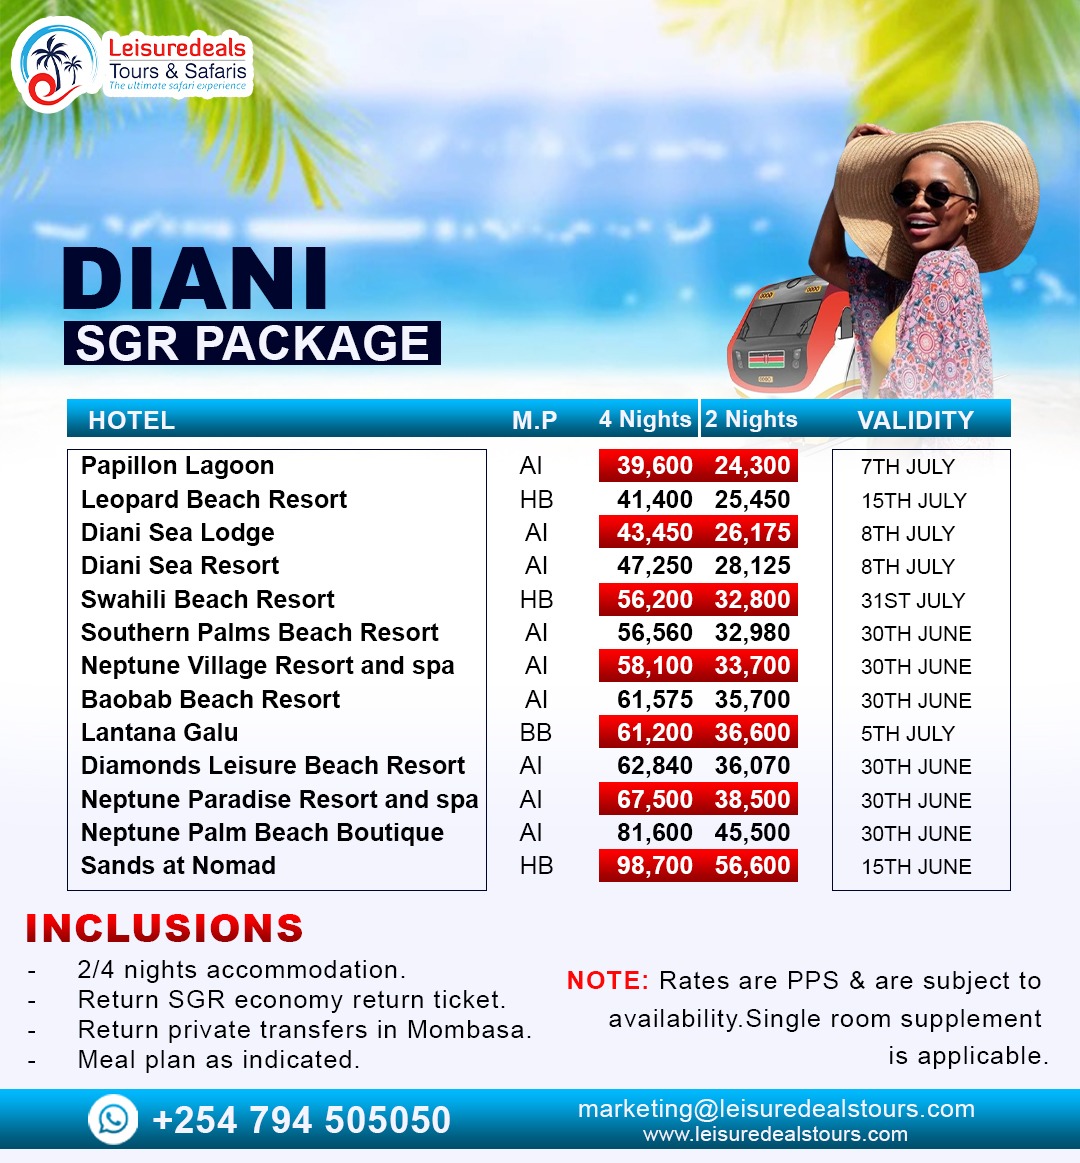 Make your dream a reality with @leisuredeals_tours #Diani holiday offers from 𝐊𝐬𝐡 24,300𝐏𝐏𝐬! 🌊☀️
Your coastal escape awaits – book now! 🏖️
✨

#Leisuredealstours #lipapolepole #beachresorttrip #dinitravelseries  #visitdiani #dianibeach #dianitrips  #holidays #vacations